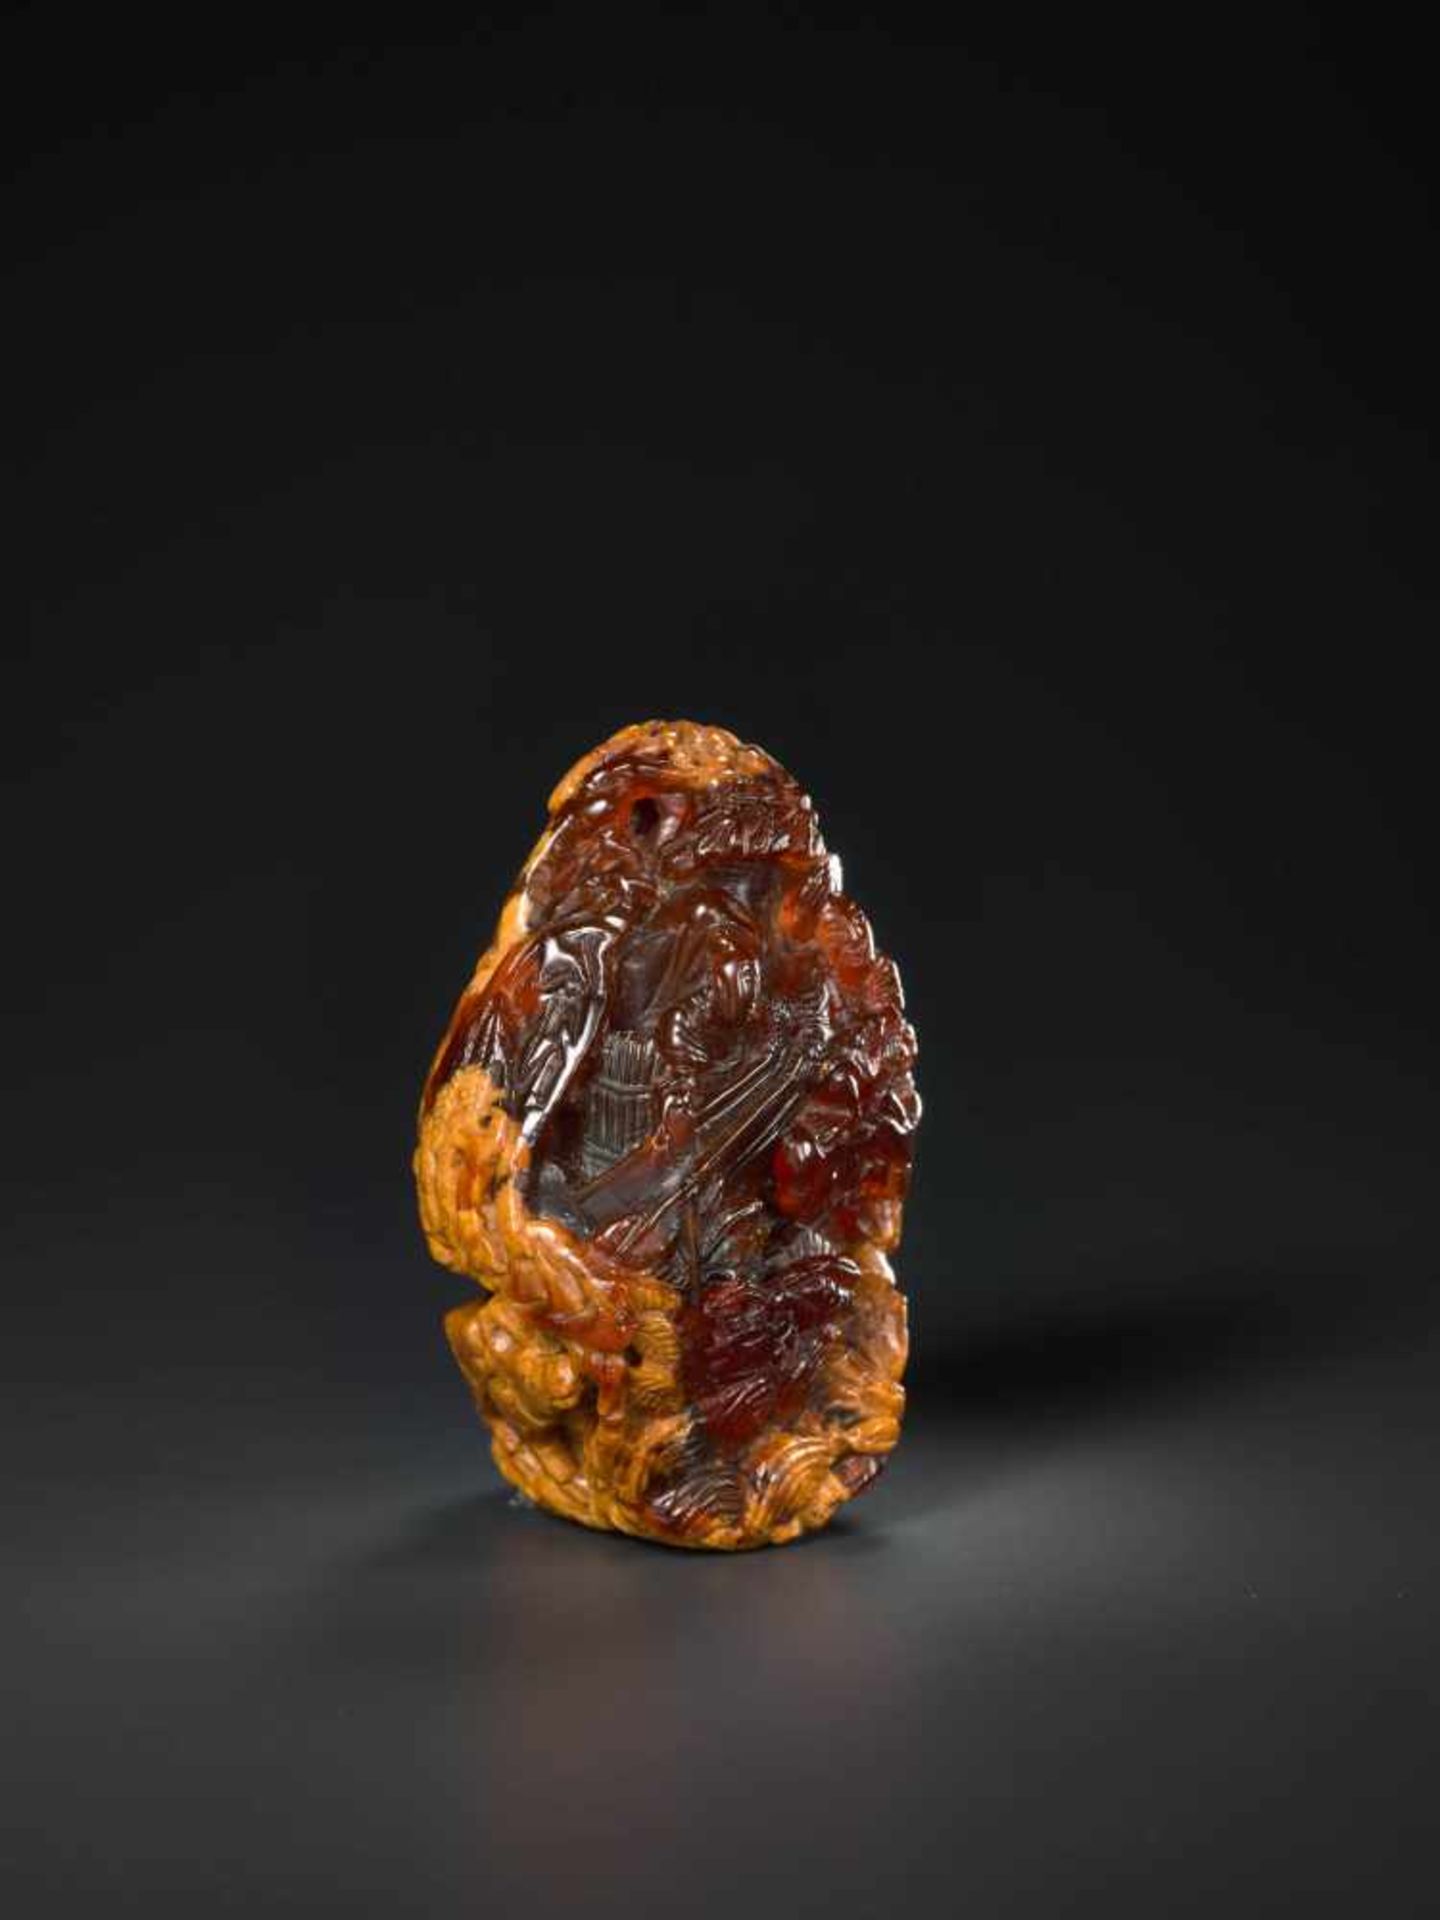 AN 18th CENTURY AMBER PEBBLE CARVING ‘VILLAGE LIFE’ Amber of deep red and caramel color, opaque - Image 5 of 8